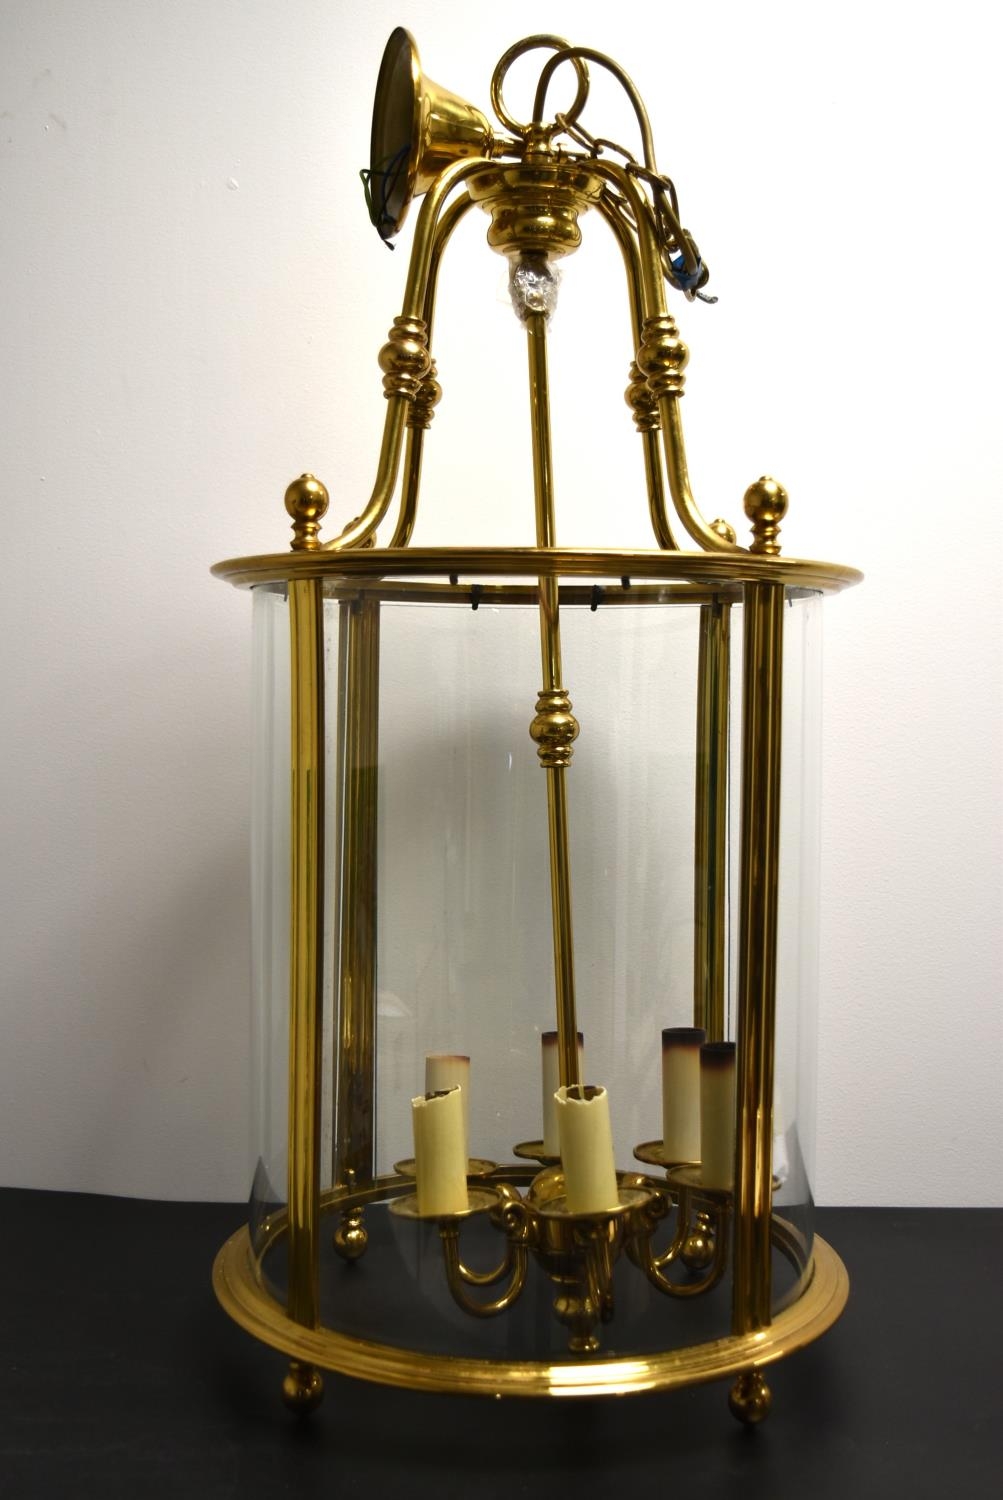 A 20th century brass and glass cylindrical hanging lantern with six branches for lightbulbs. H.82